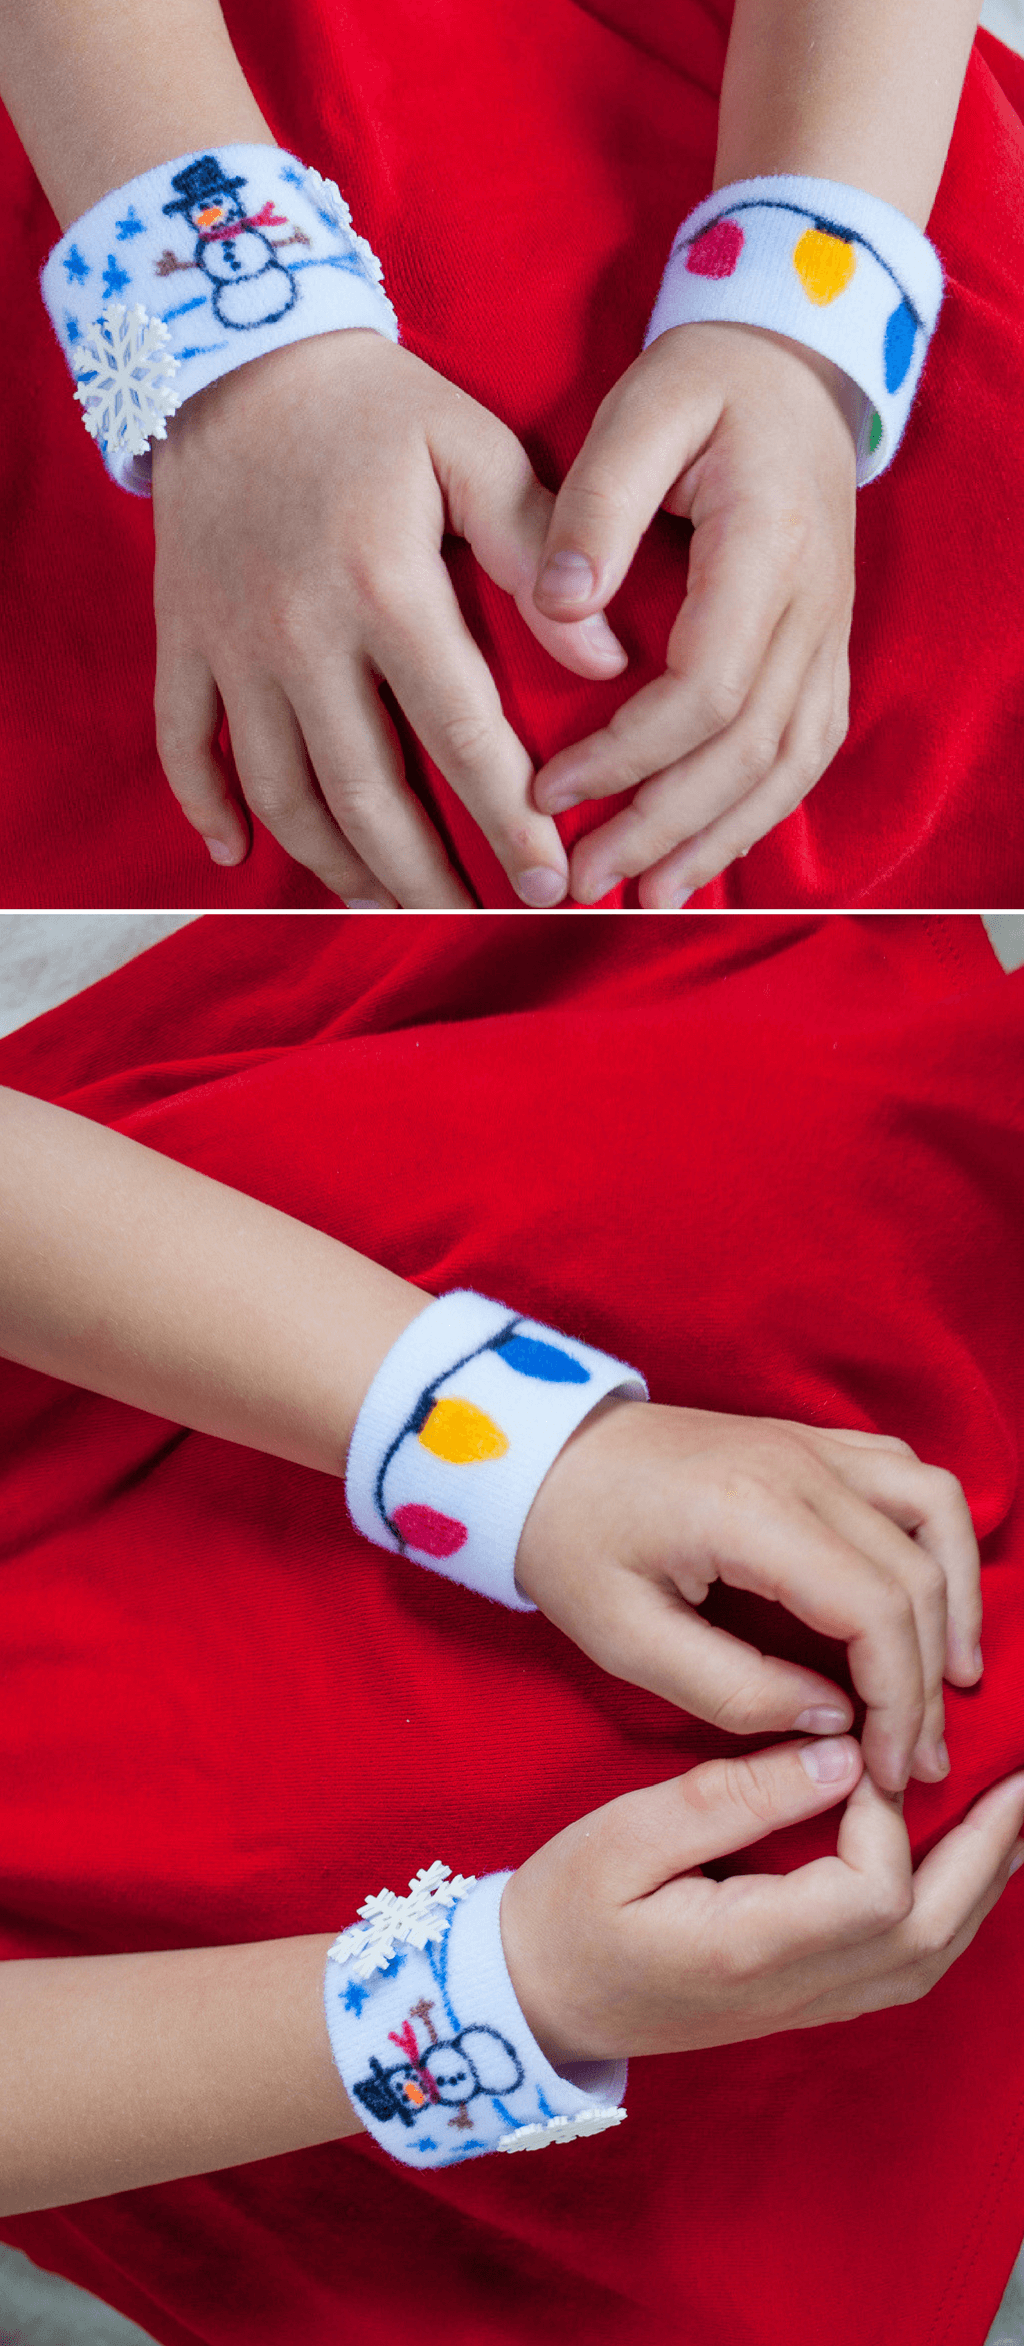 Color bracelets for the holidays! Make these no-sew DIY Christmas bracelets with the kids. They're no-sew and take just 10 minute each to make. #christmas #diy #handmadechristmas #diychristmas #kidsactivities